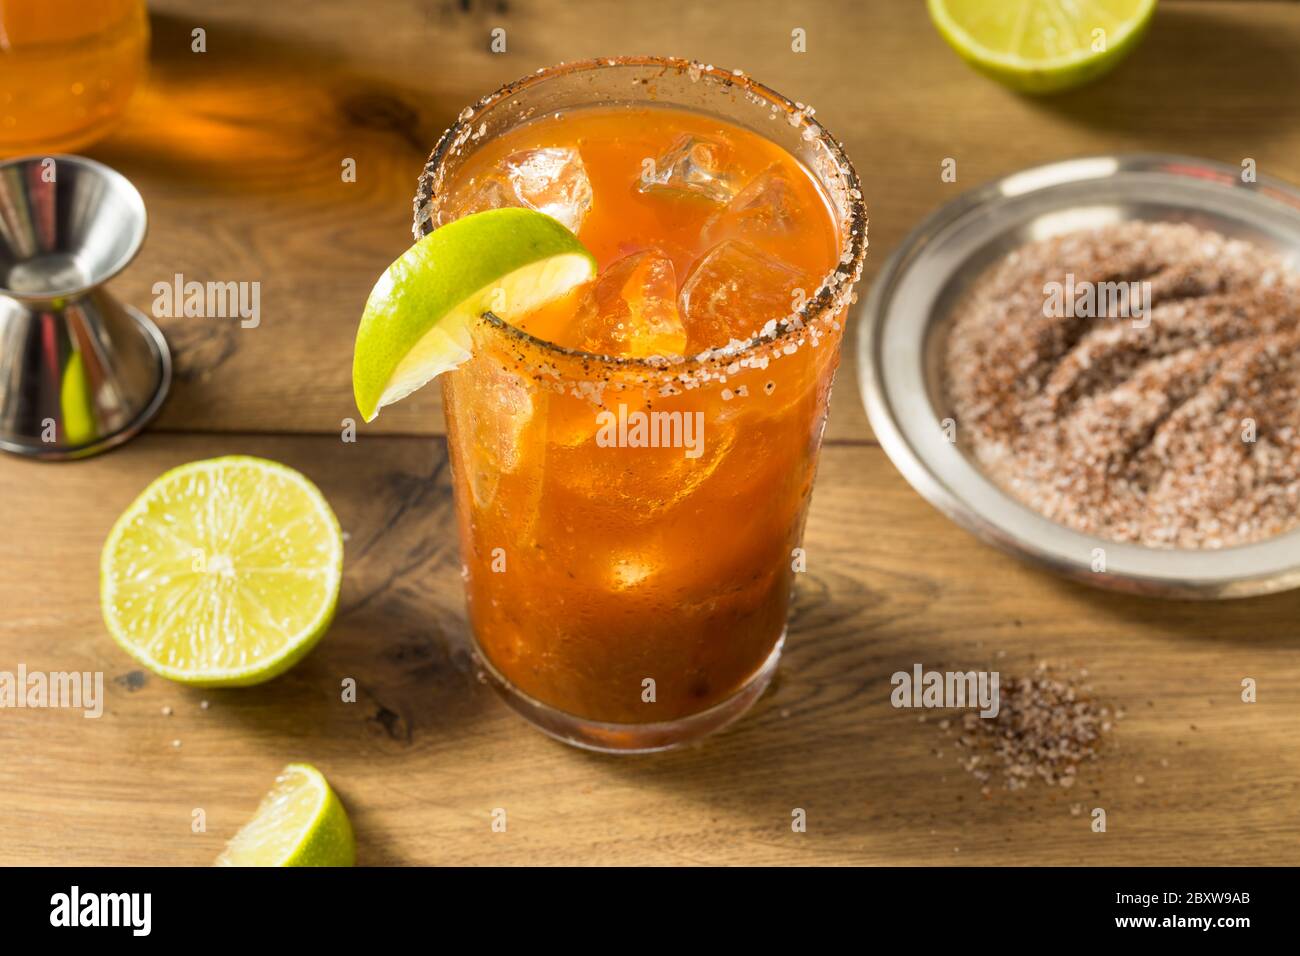 Homemade Mexican Michelada Beer Cocktail with Lime Stock Photo